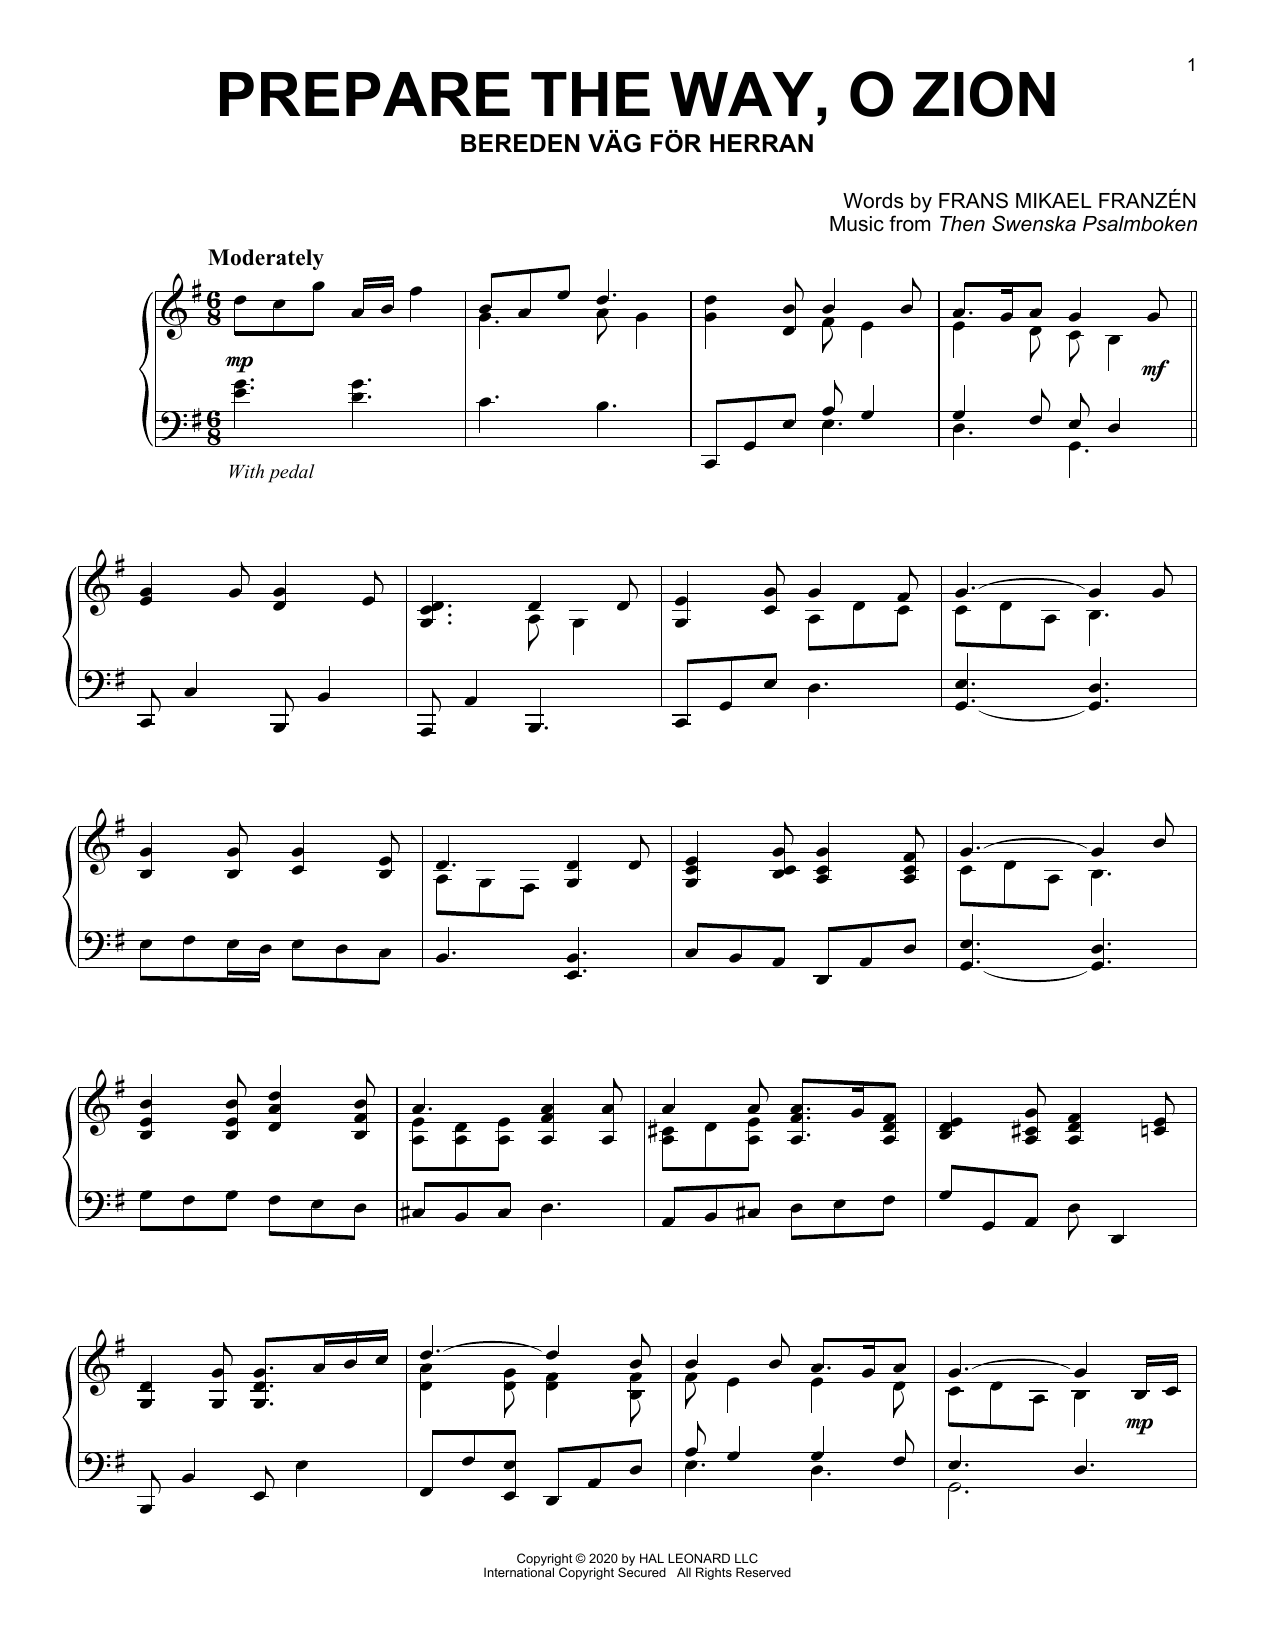 Download Frans Mikael Frazen Prepare The Way, O Zion Sheet Music